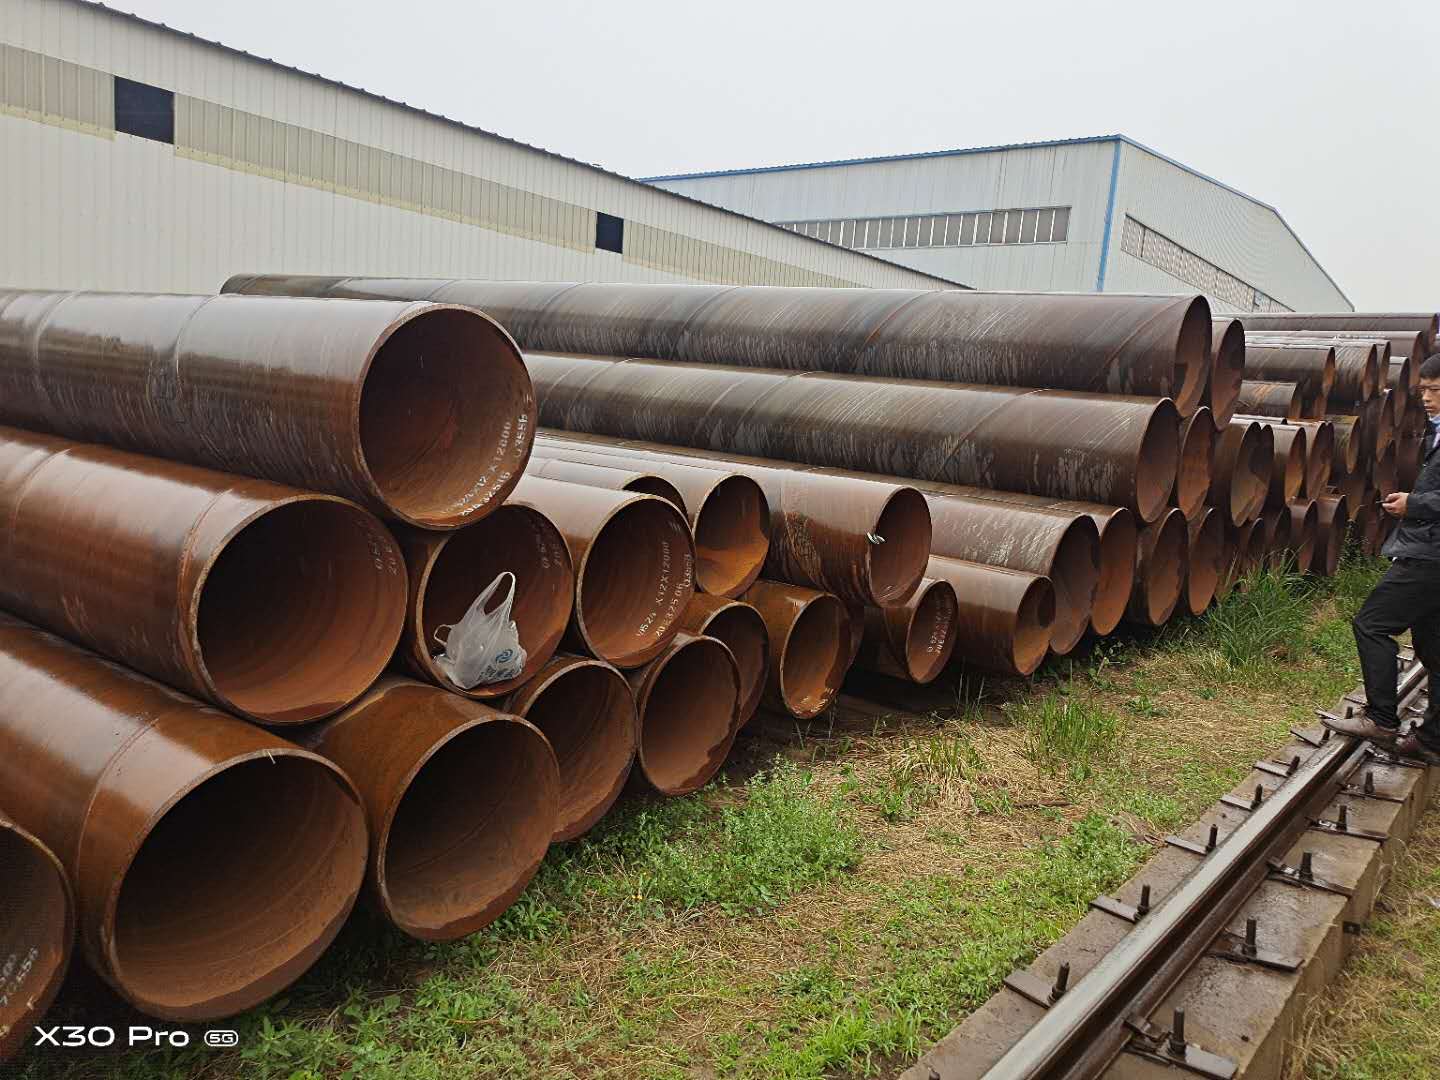 Several Common Skills in Purchasing Spiral Steel Pipes